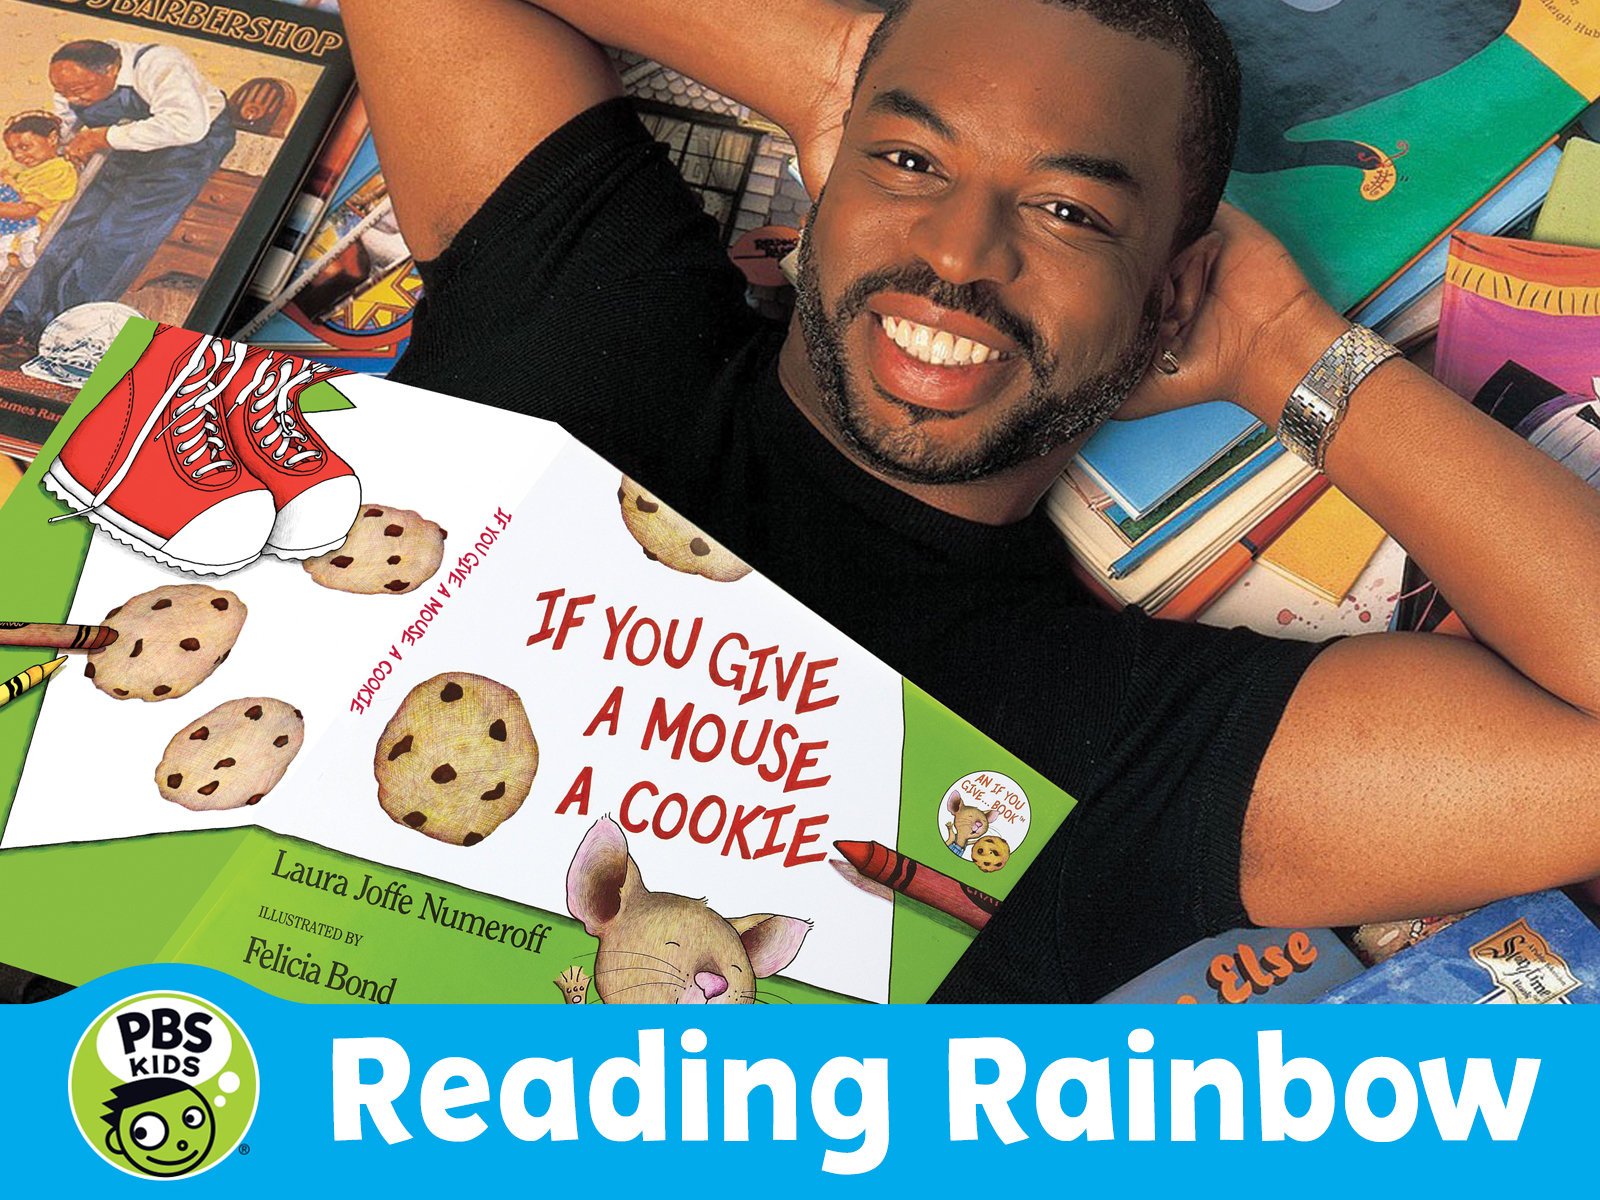 6 Facts About Reading Rainbow That You Won't Have To Take My Word For